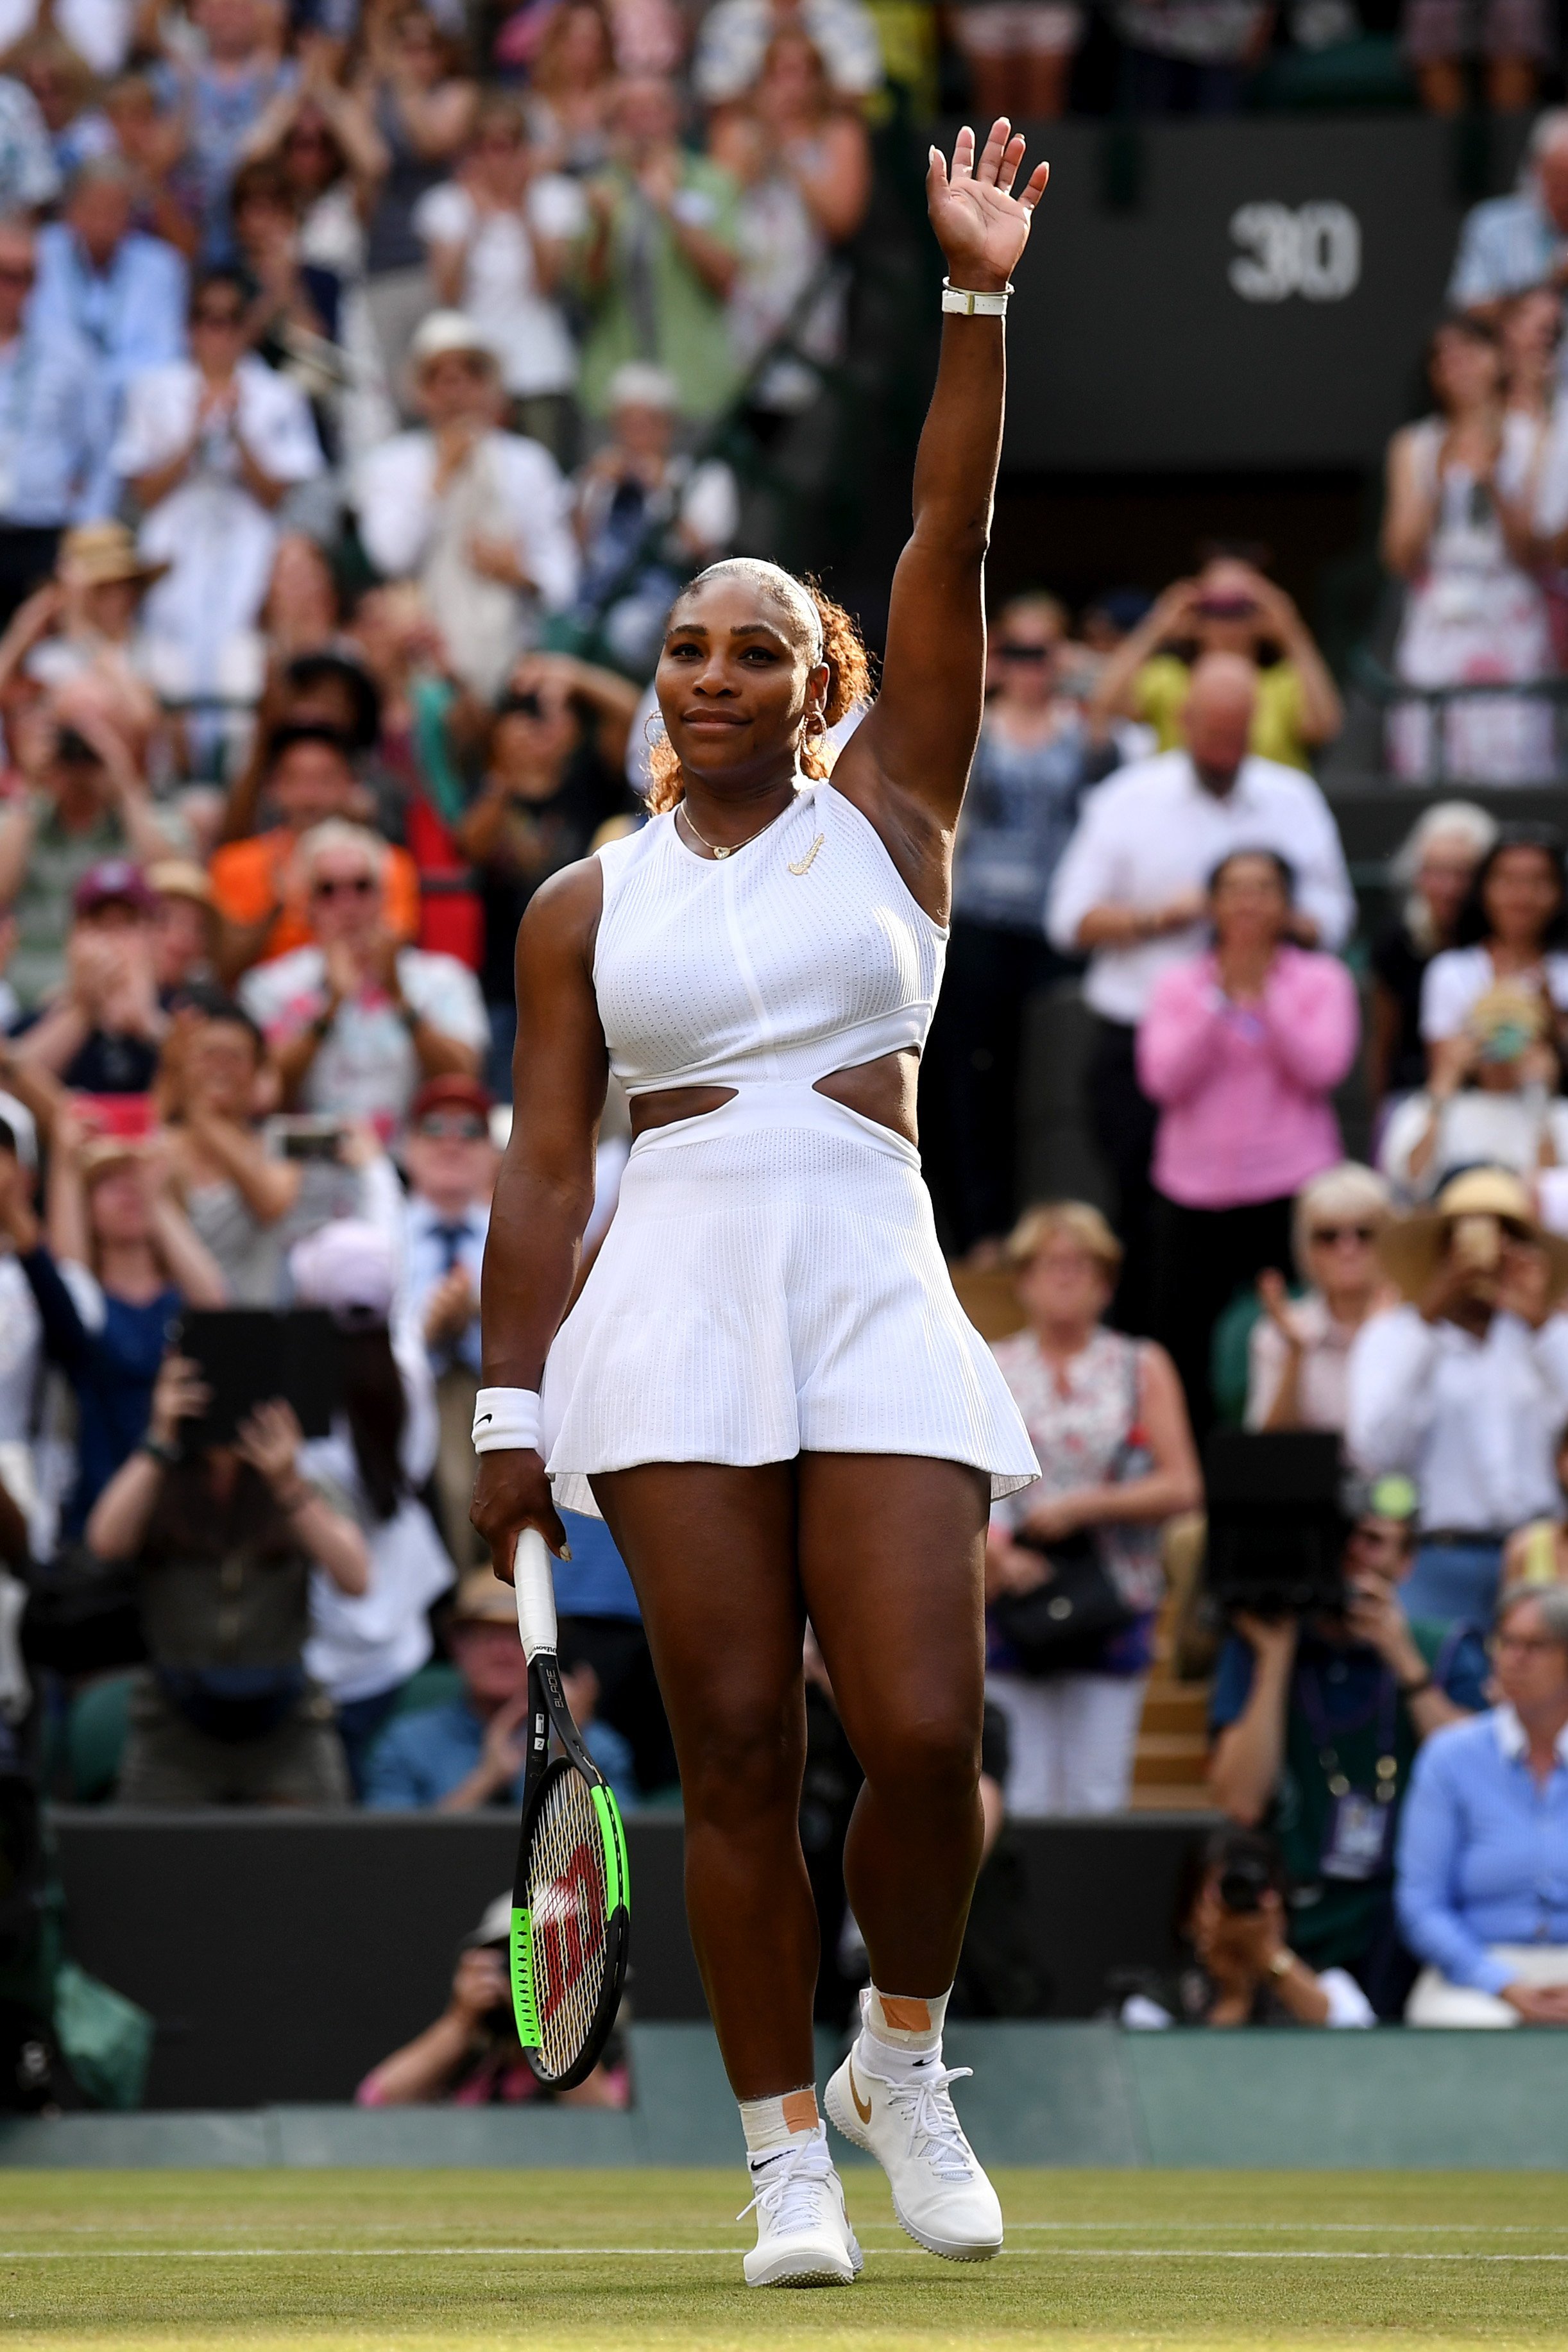 Serena Williams at Wimbledon 2019 on July 11, 2019 in London, England. |Photo: Getty Images